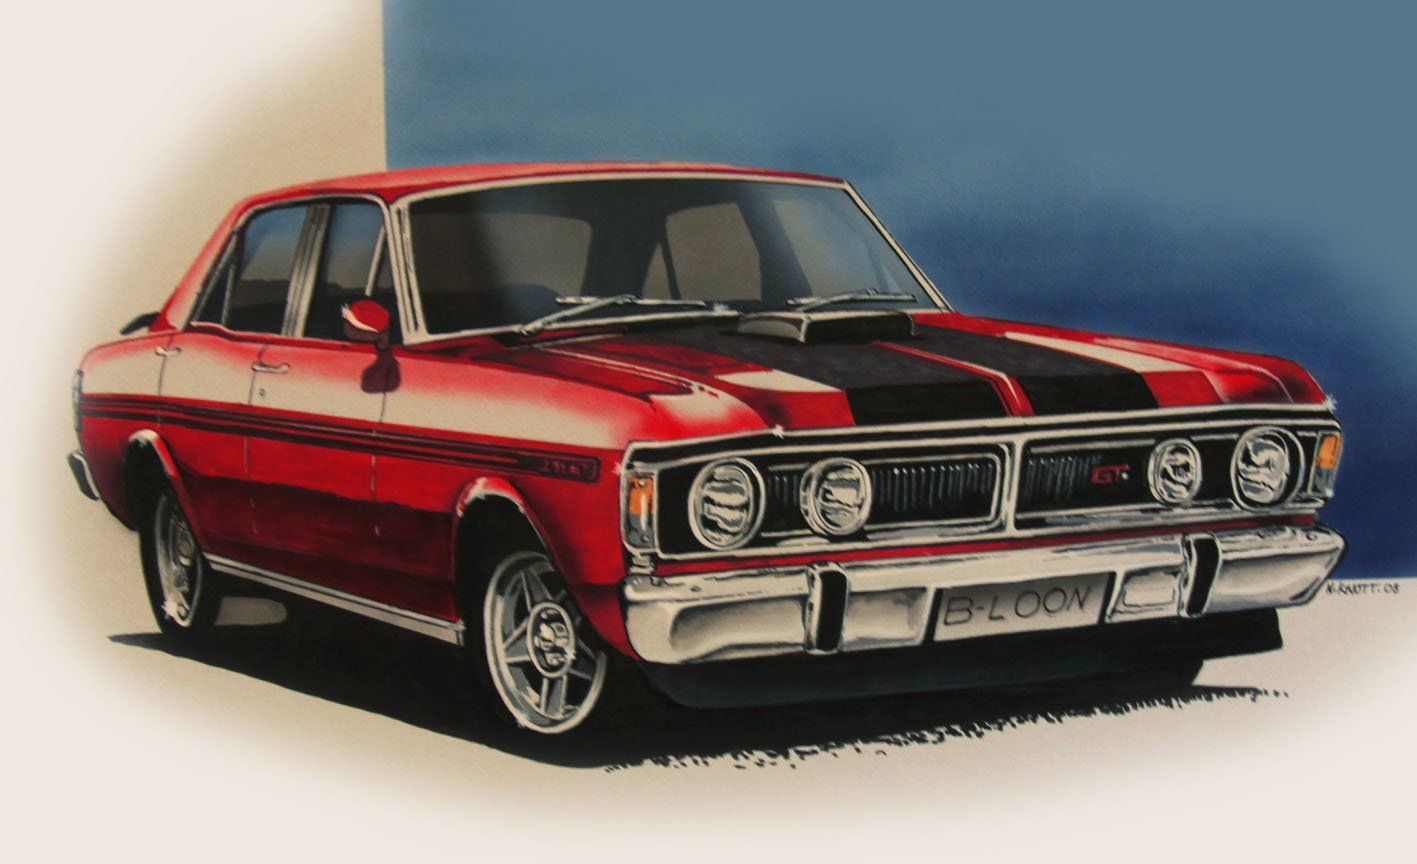 1964 Ford Falcon Wallpapers